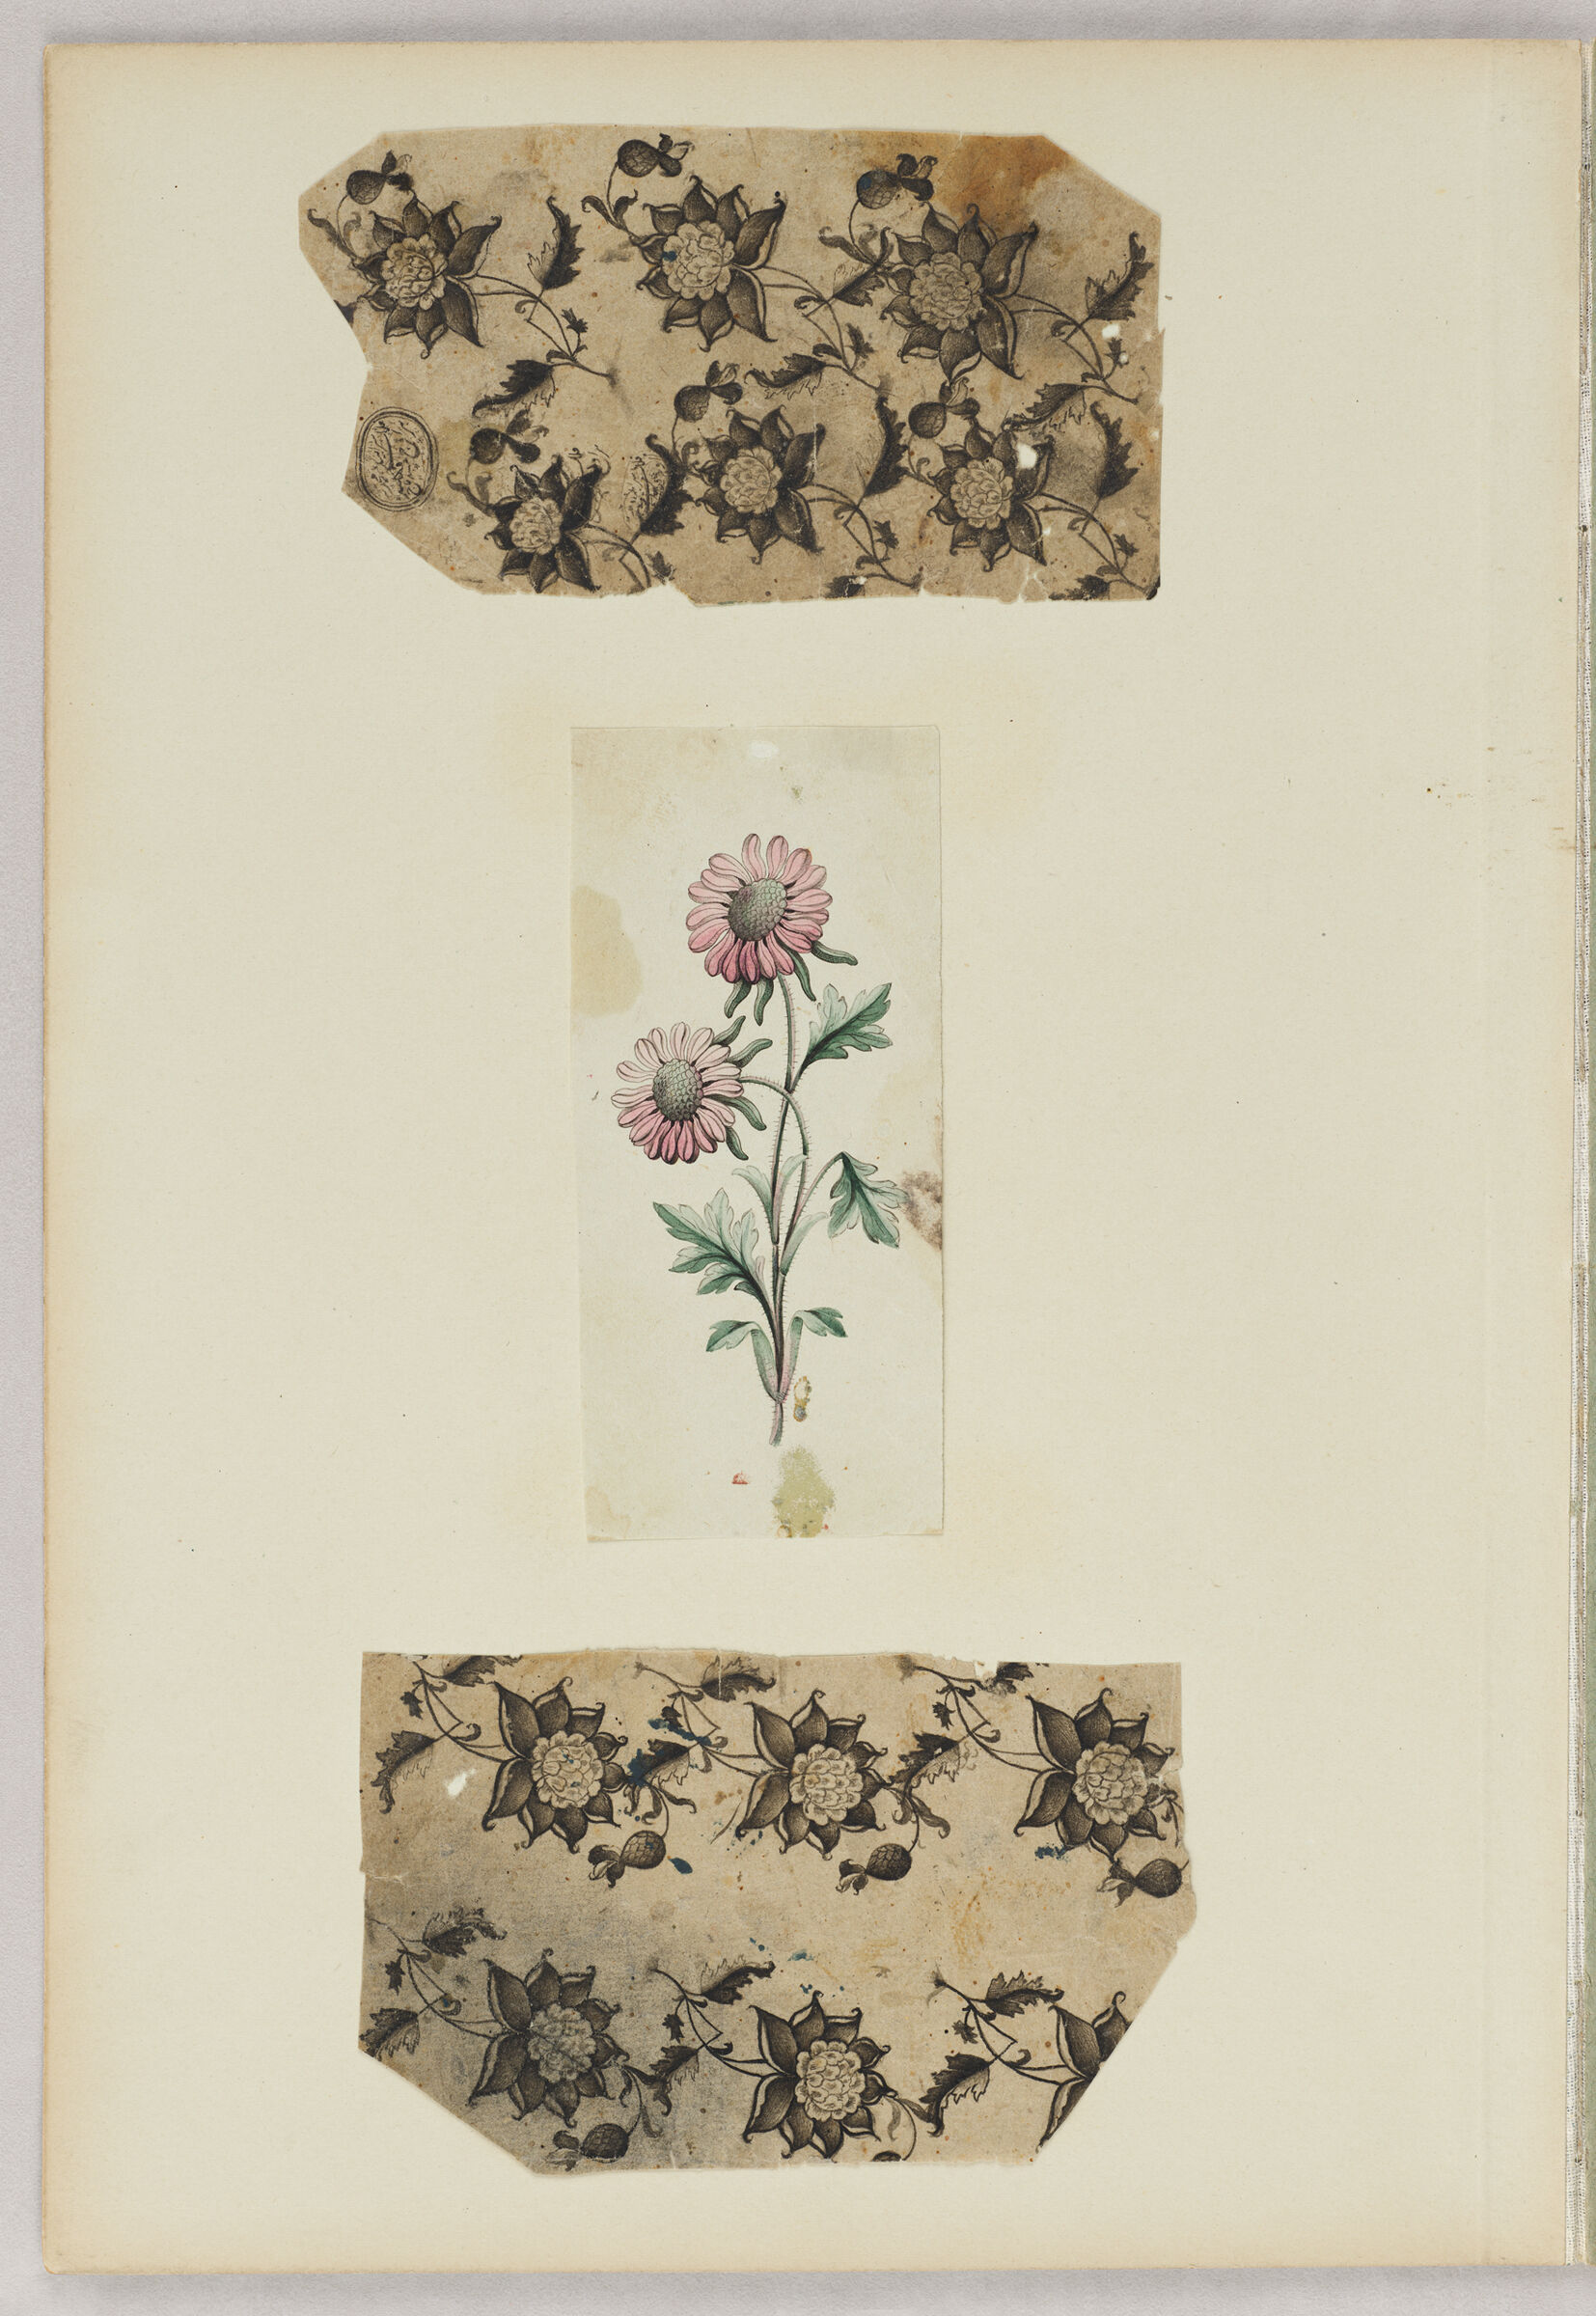 Folio 45 From An Album Of Drawings And Paintings: Three Sheets With Floral Drawings (Recto); Blank Page (Verso)